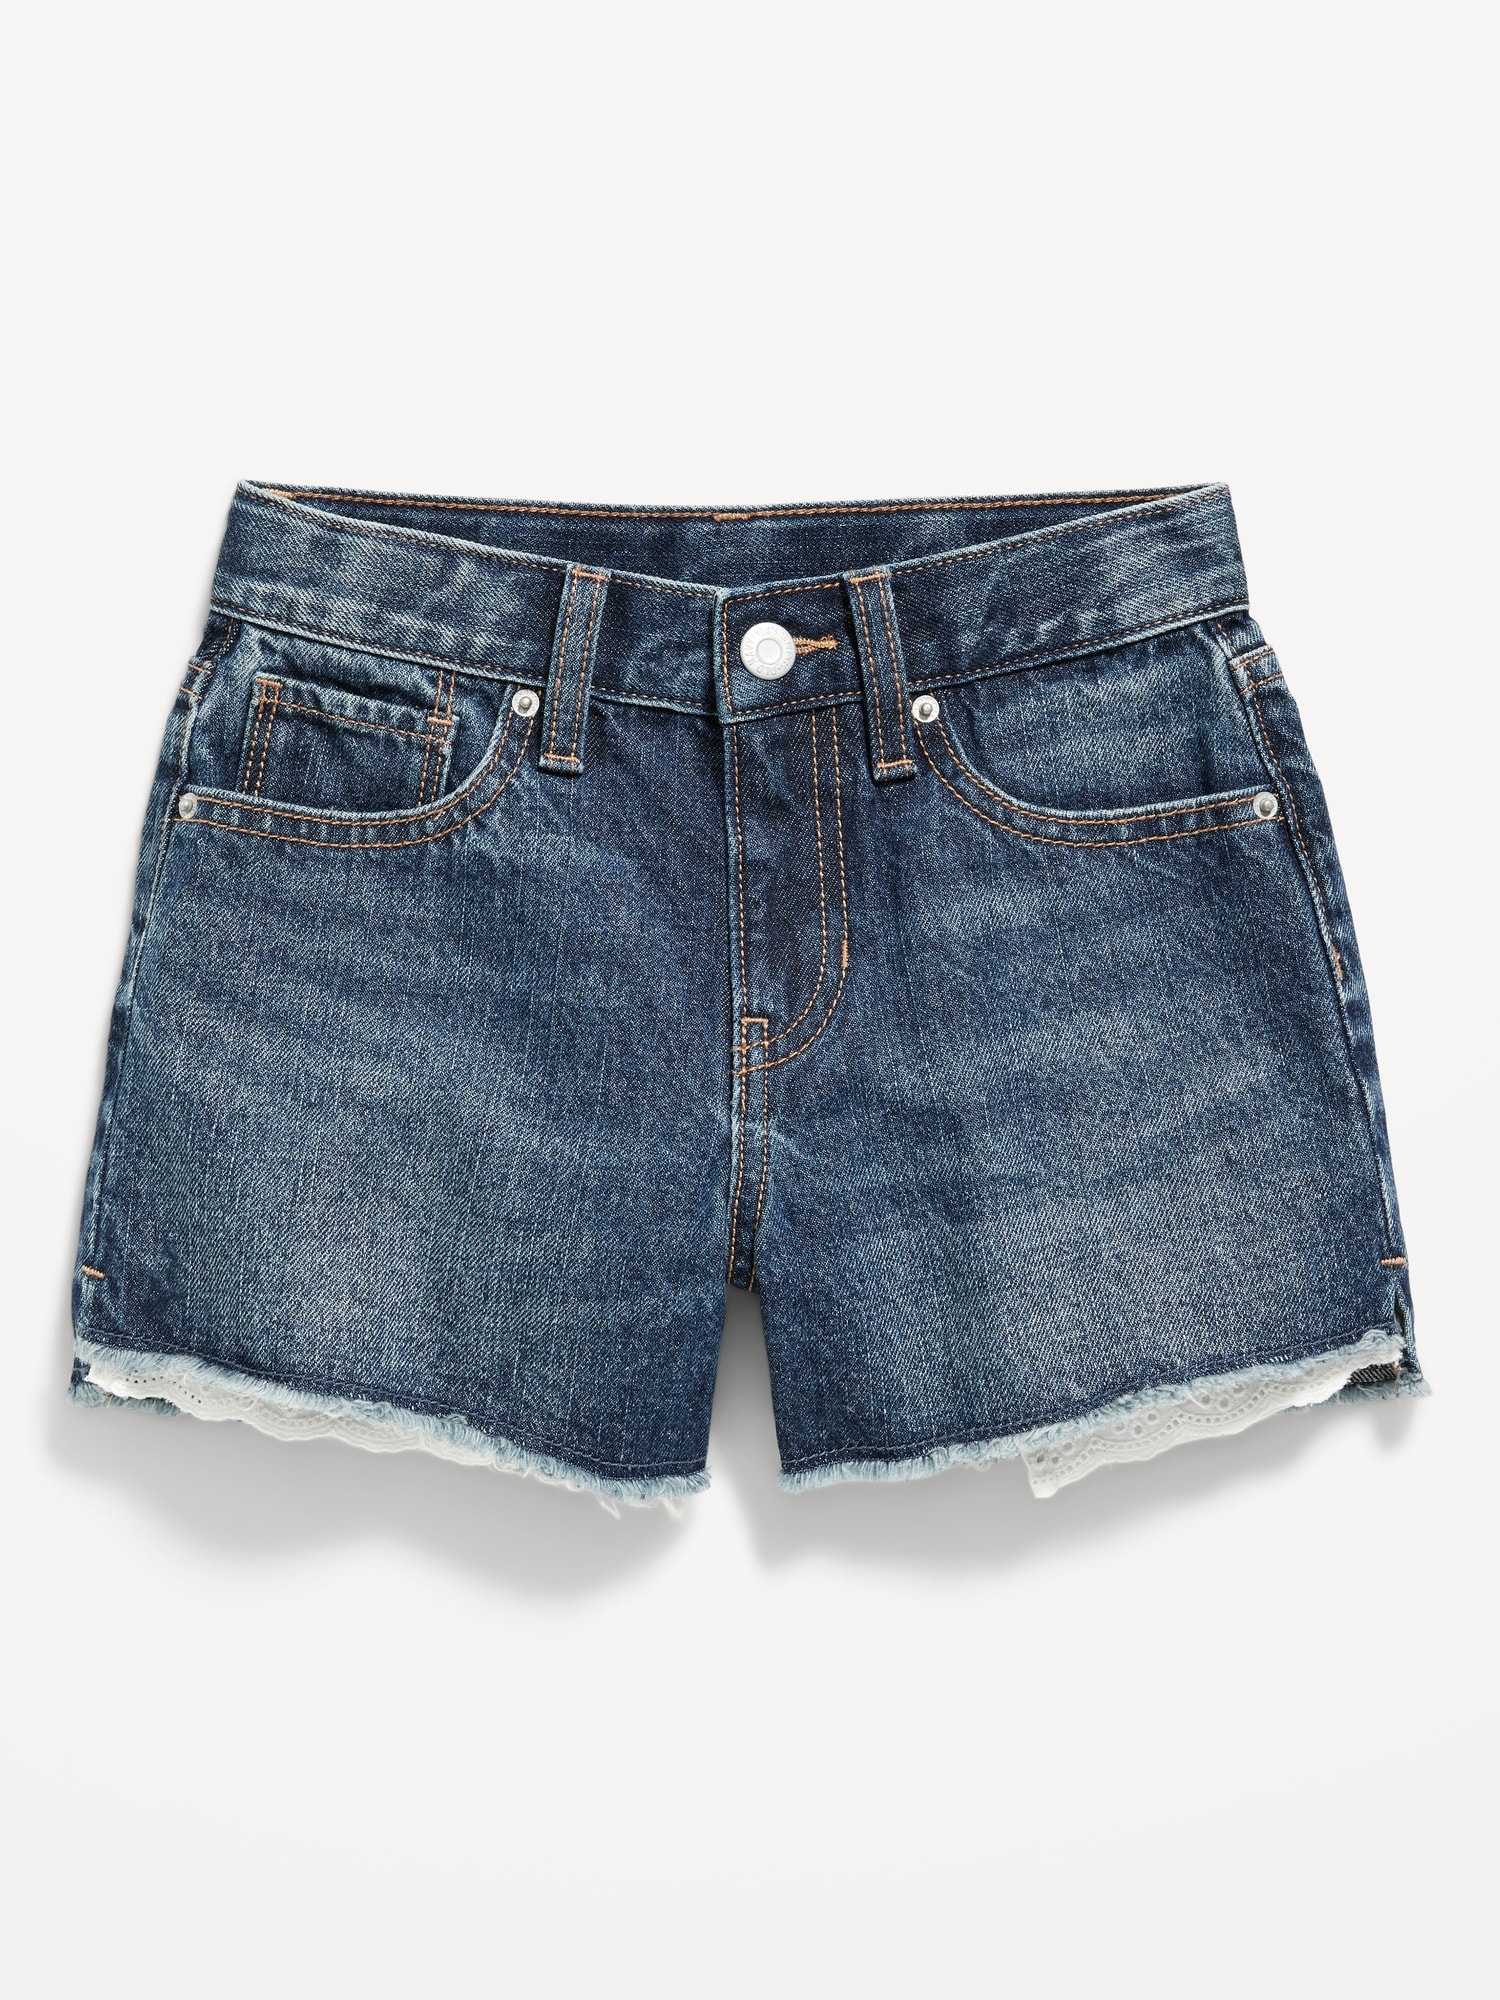 High-Waisted Exposed Lace-Pocket Jean Shorts for Girls | Old Navy